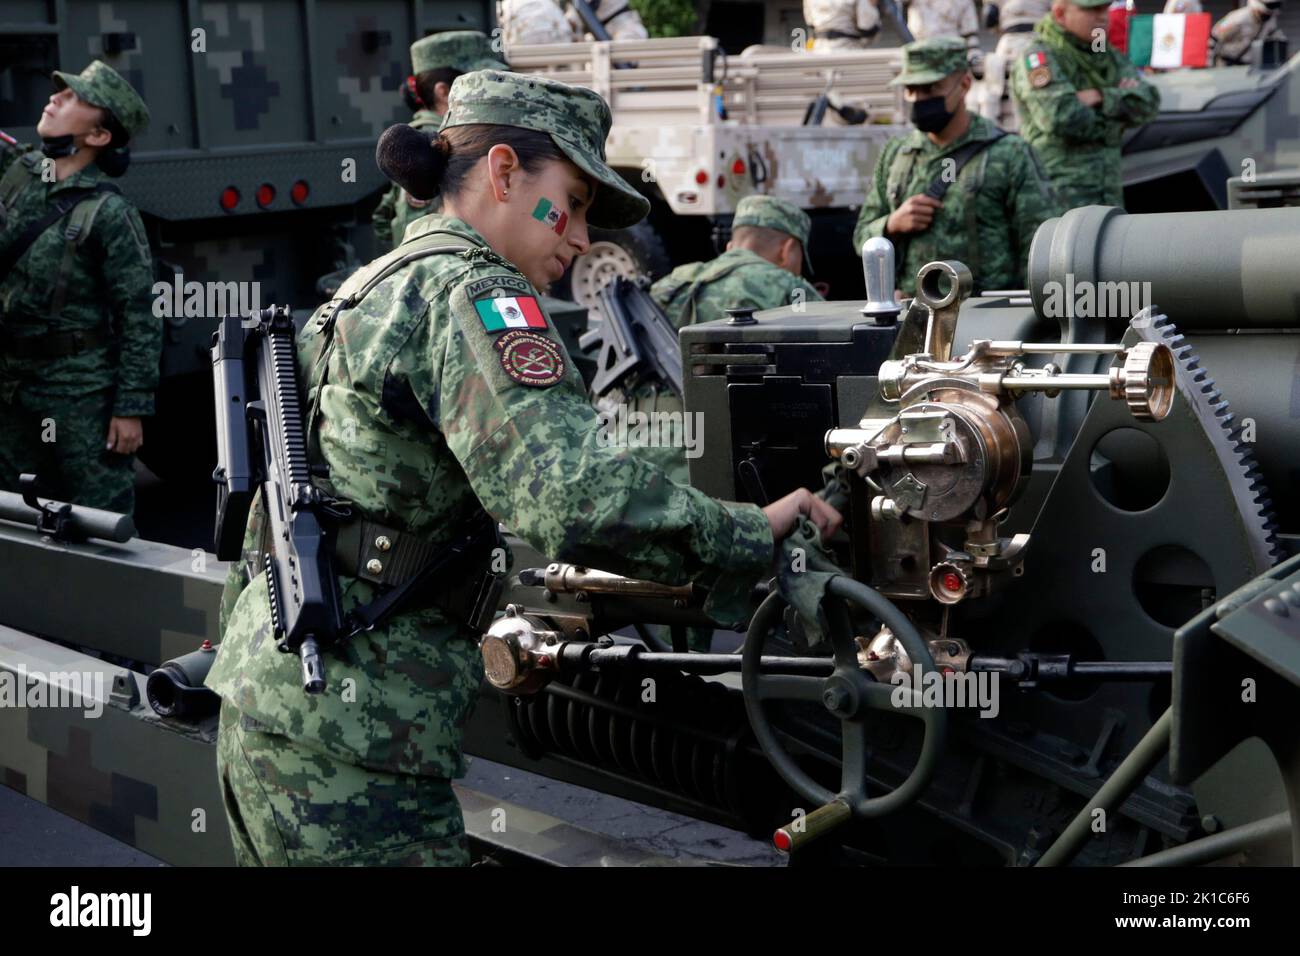 Mexico City, Mexico. 16th Sep, 2022. A woman of the Armed Forces prior to the military civic parade on the 212th anniversary of the cry of independence at the Zocalo in Mexico City, Mexico. Credit: ZUMA Press, Inc./Alamy Live News Stock Photo